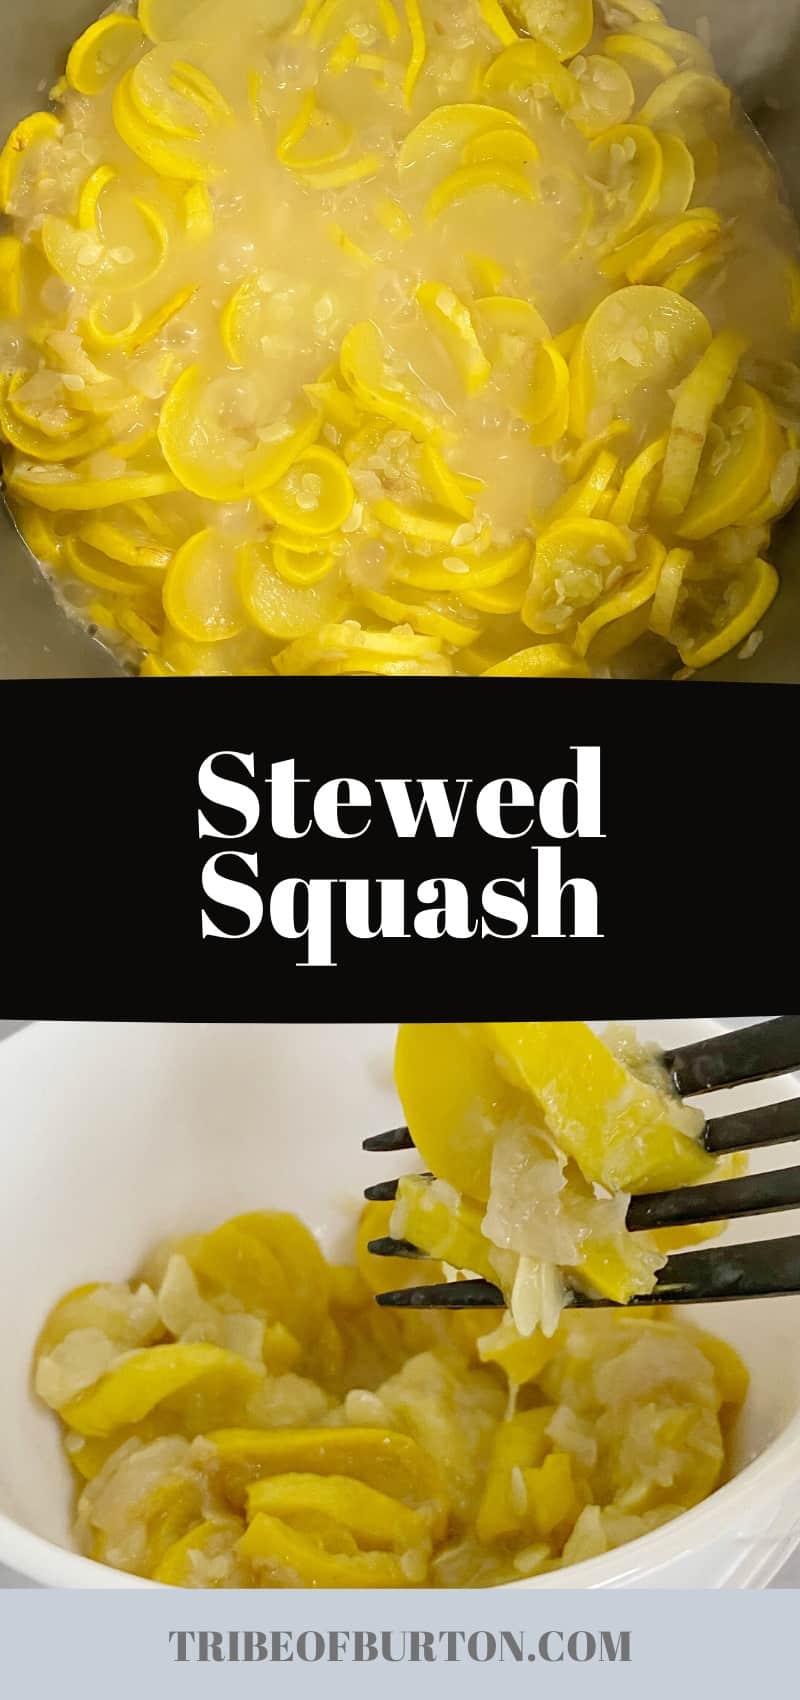 Pinterest pin with squash cooking in the top picture and a bowl of stewed squash in the bottom picture.